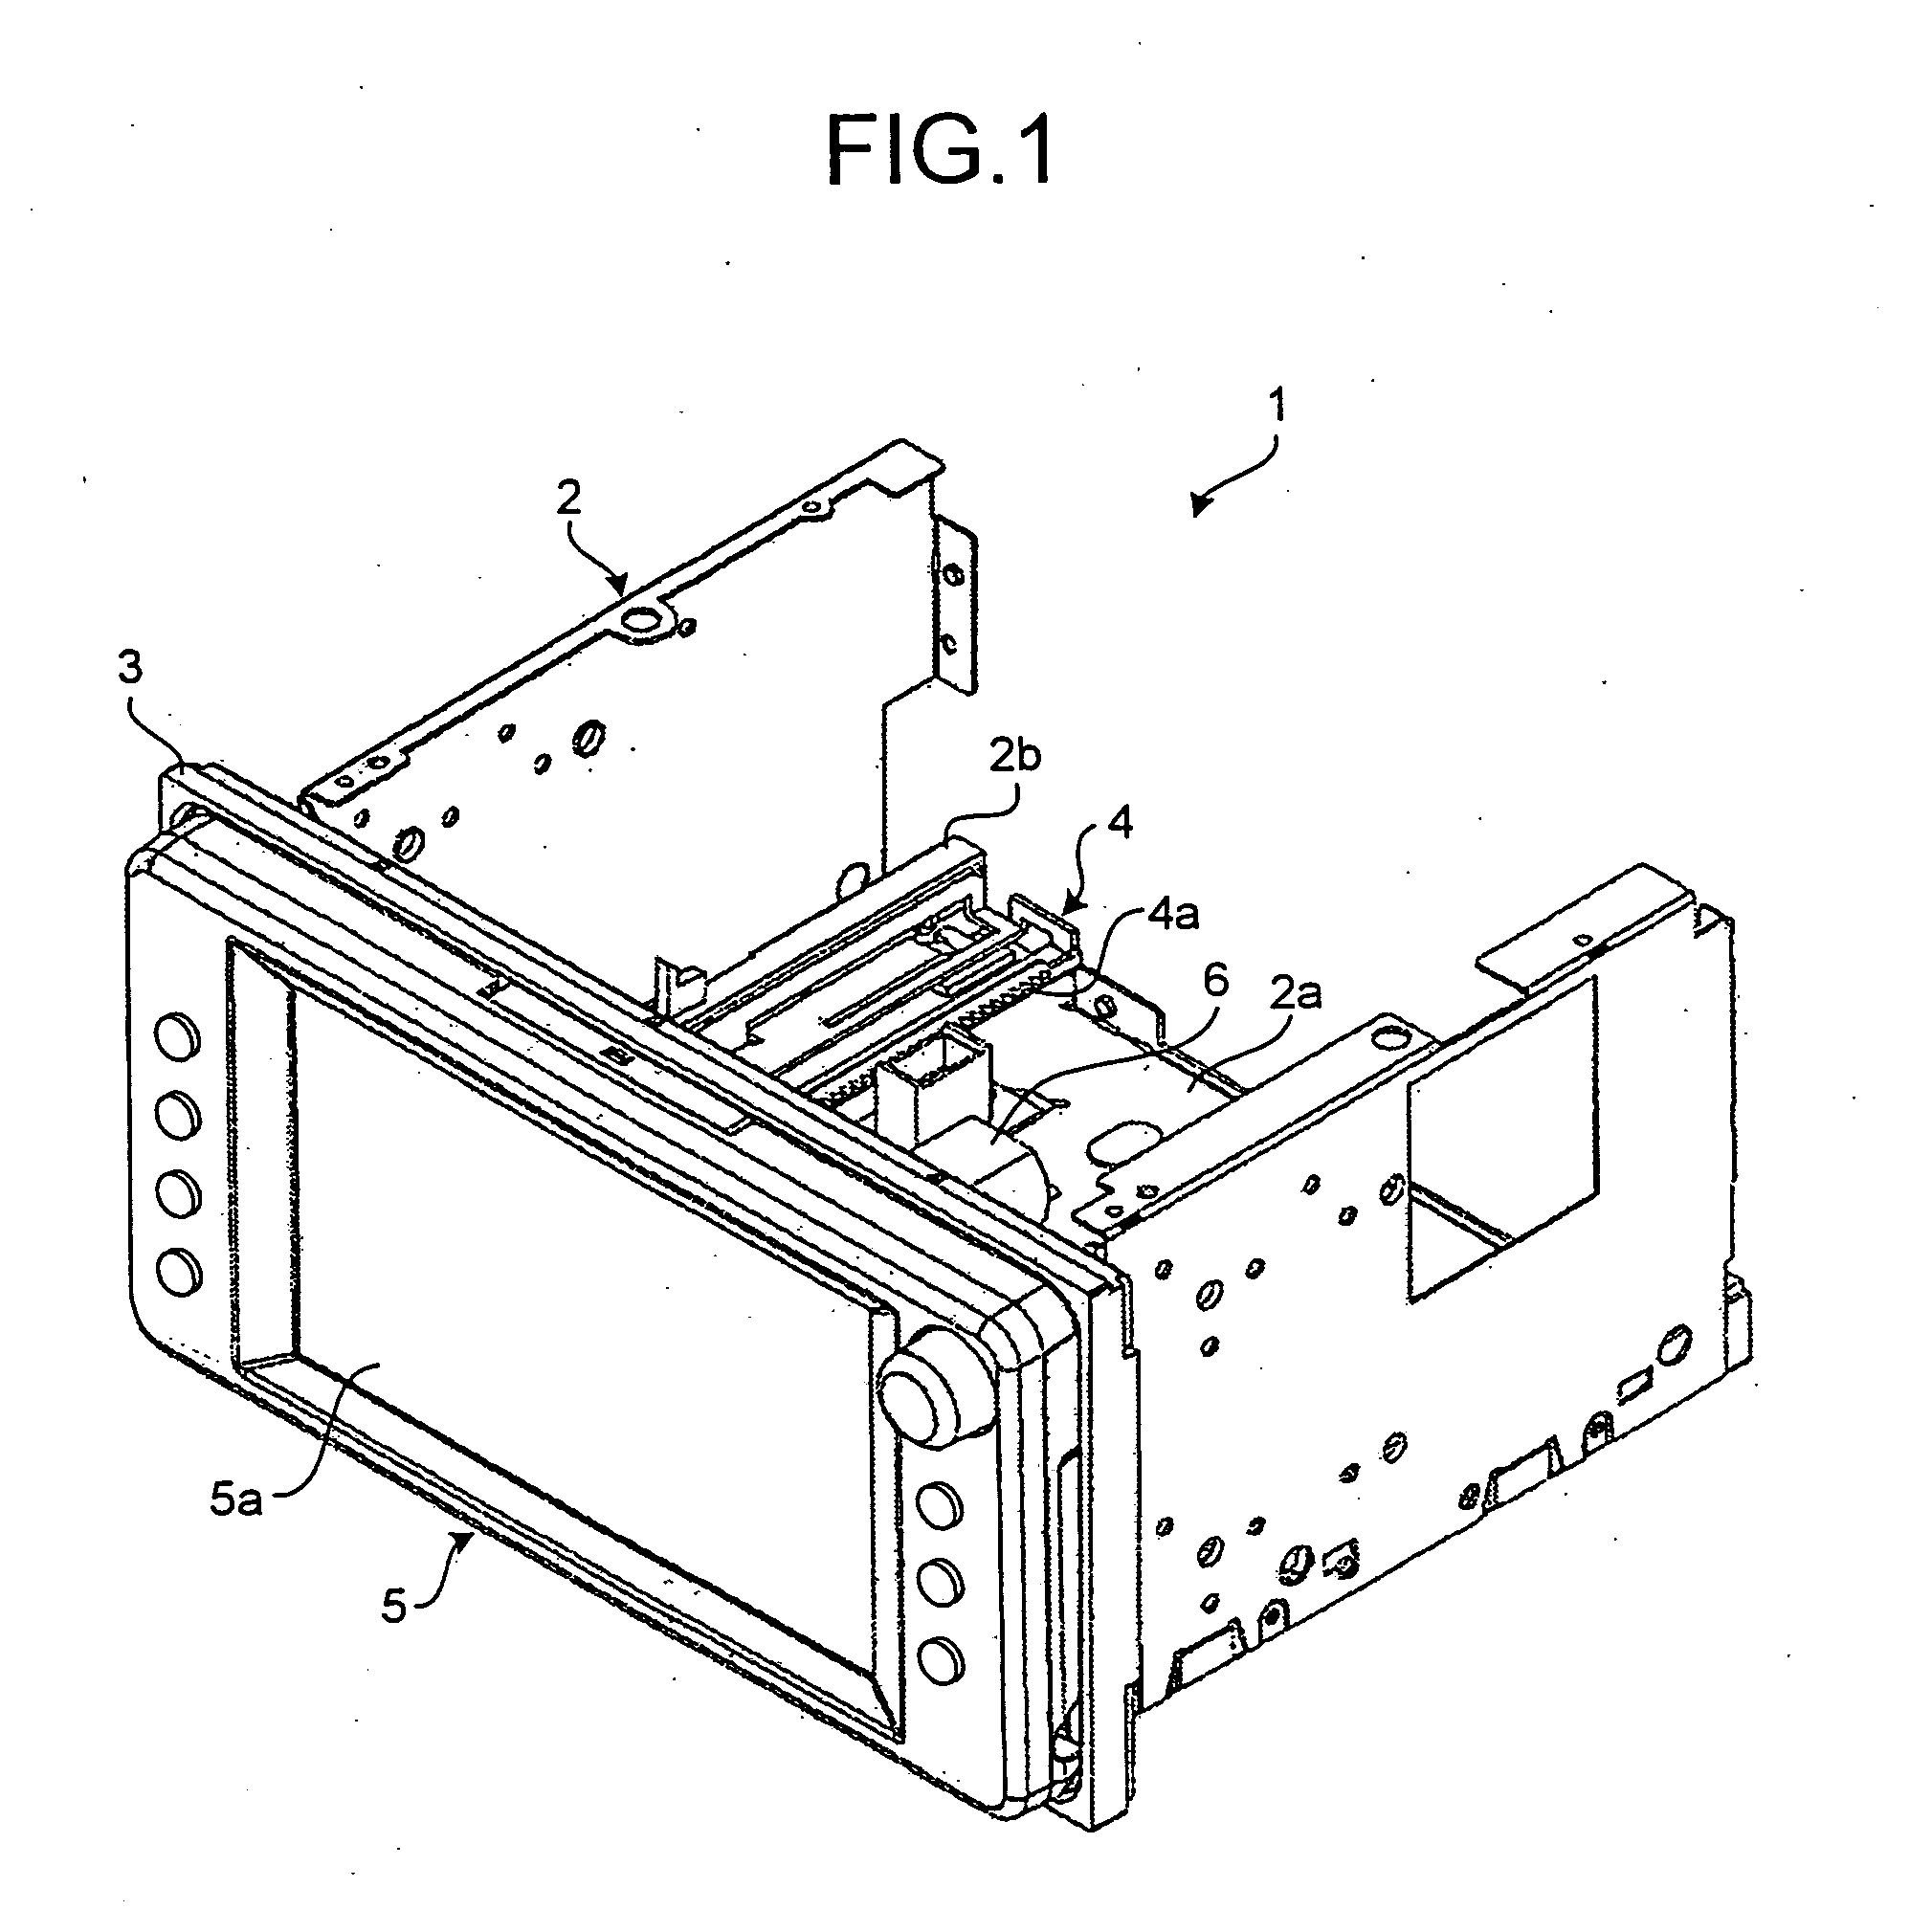 In-vehicle display apparatus